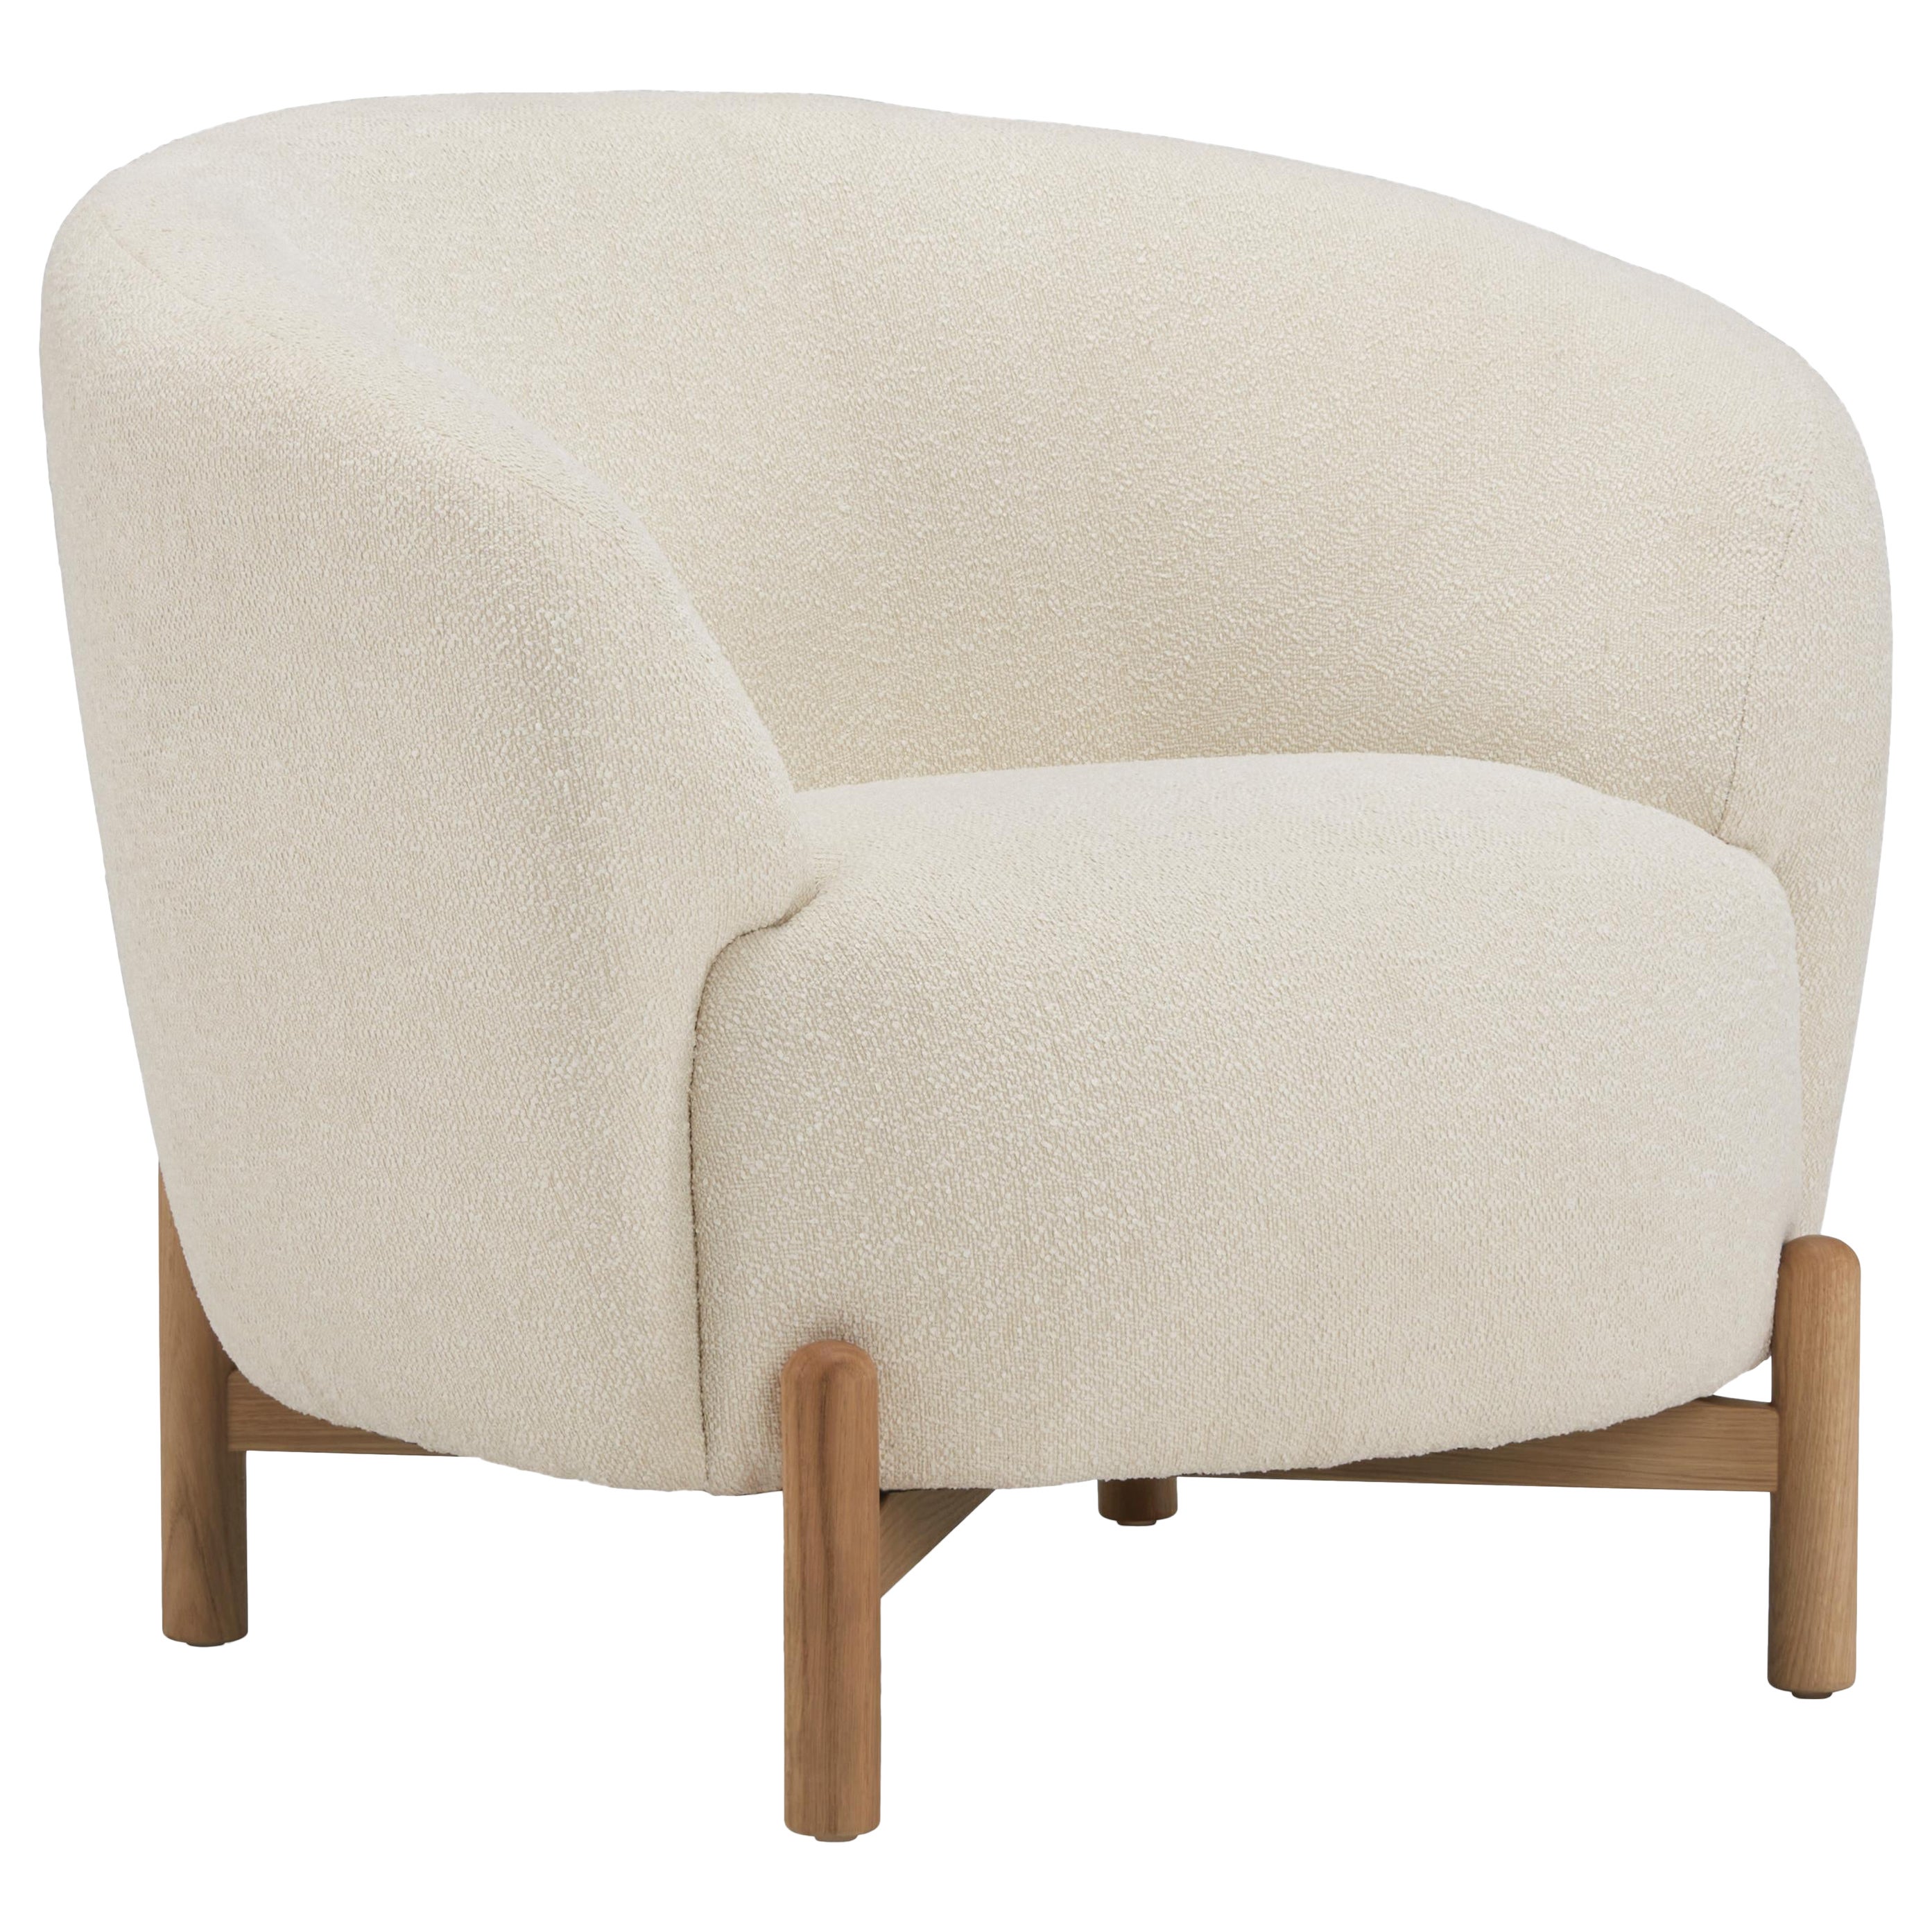 Hayche Glover Armchair - Wooden Base - Crema, UK, Made to Order